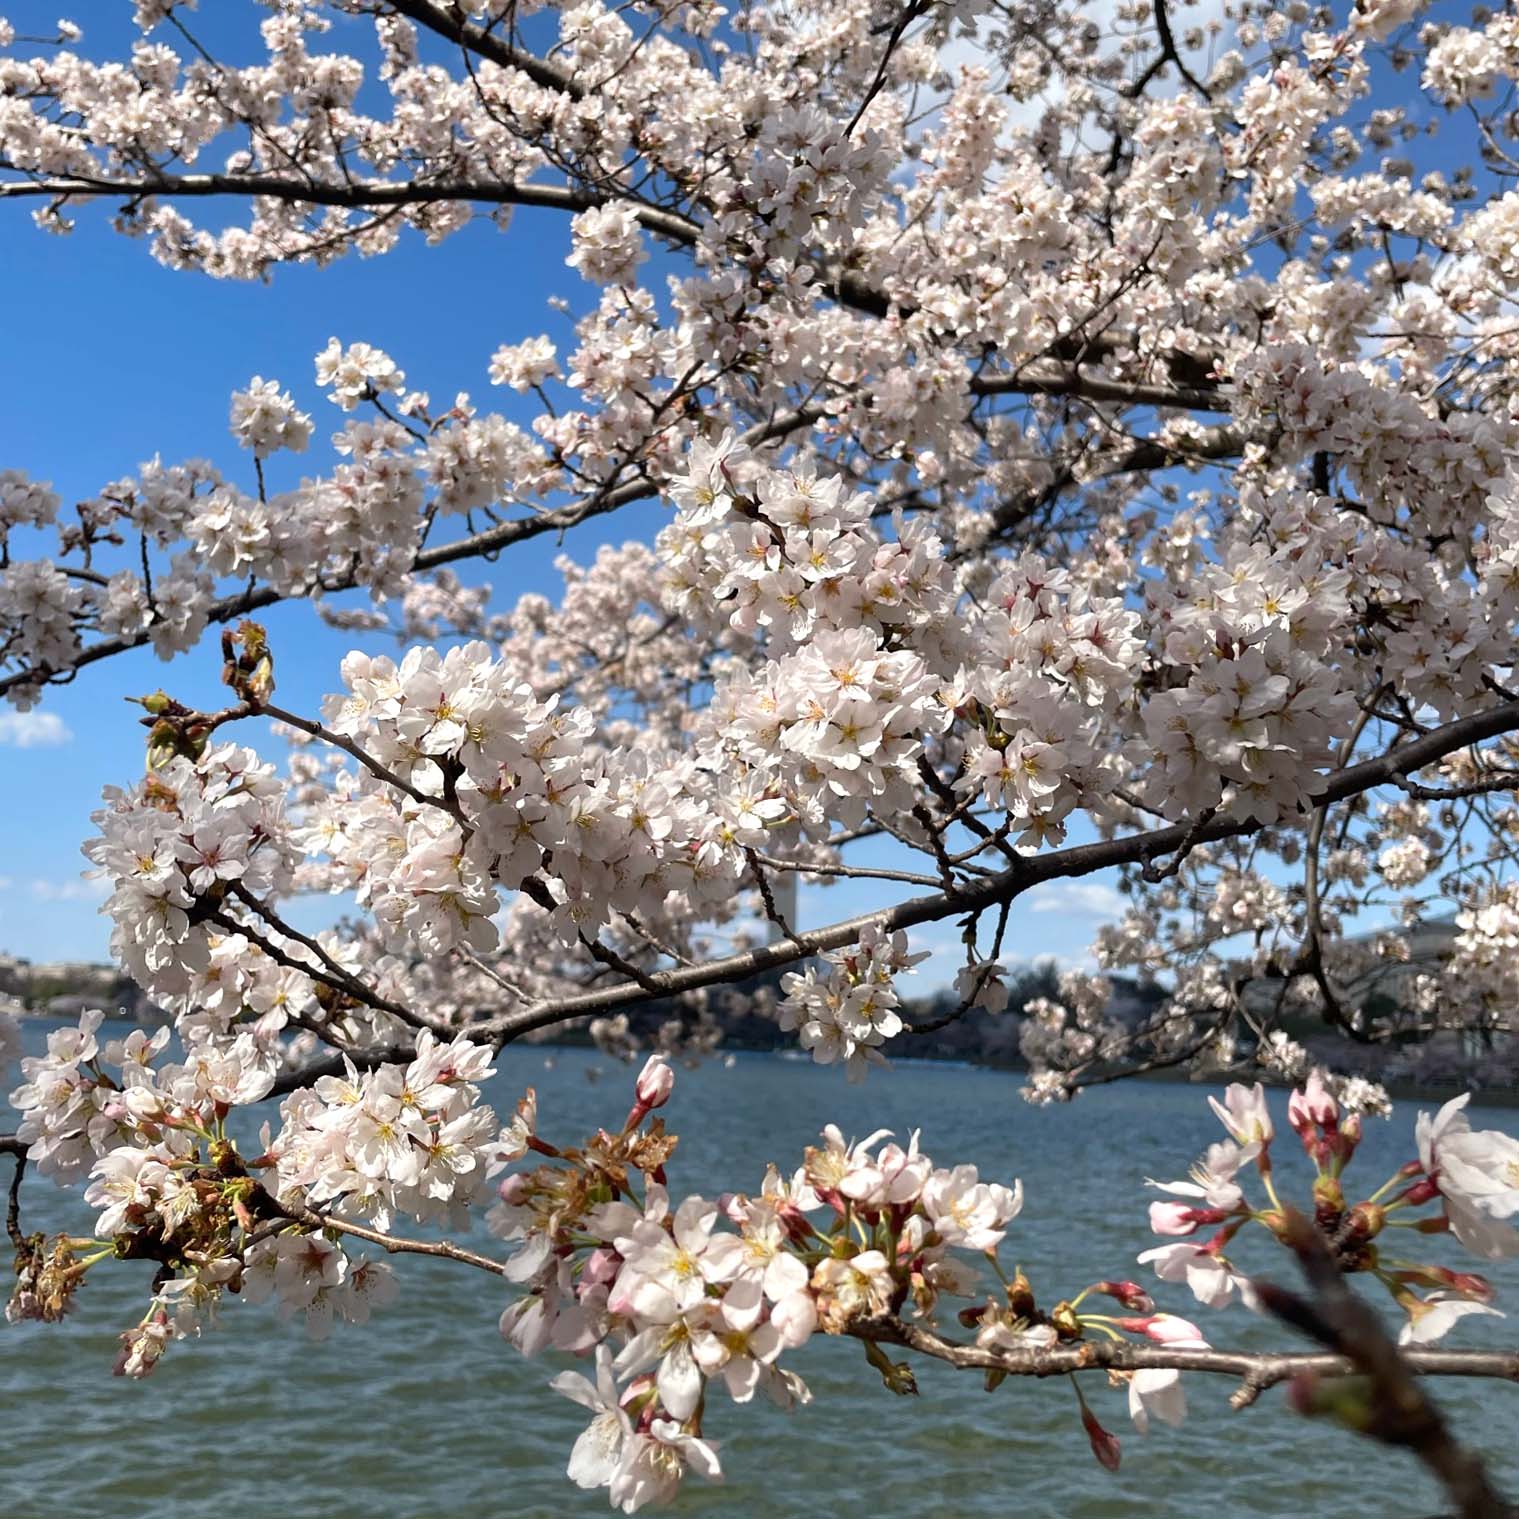 The cherry blossoms are the first sign of spring in Washington D.C. 